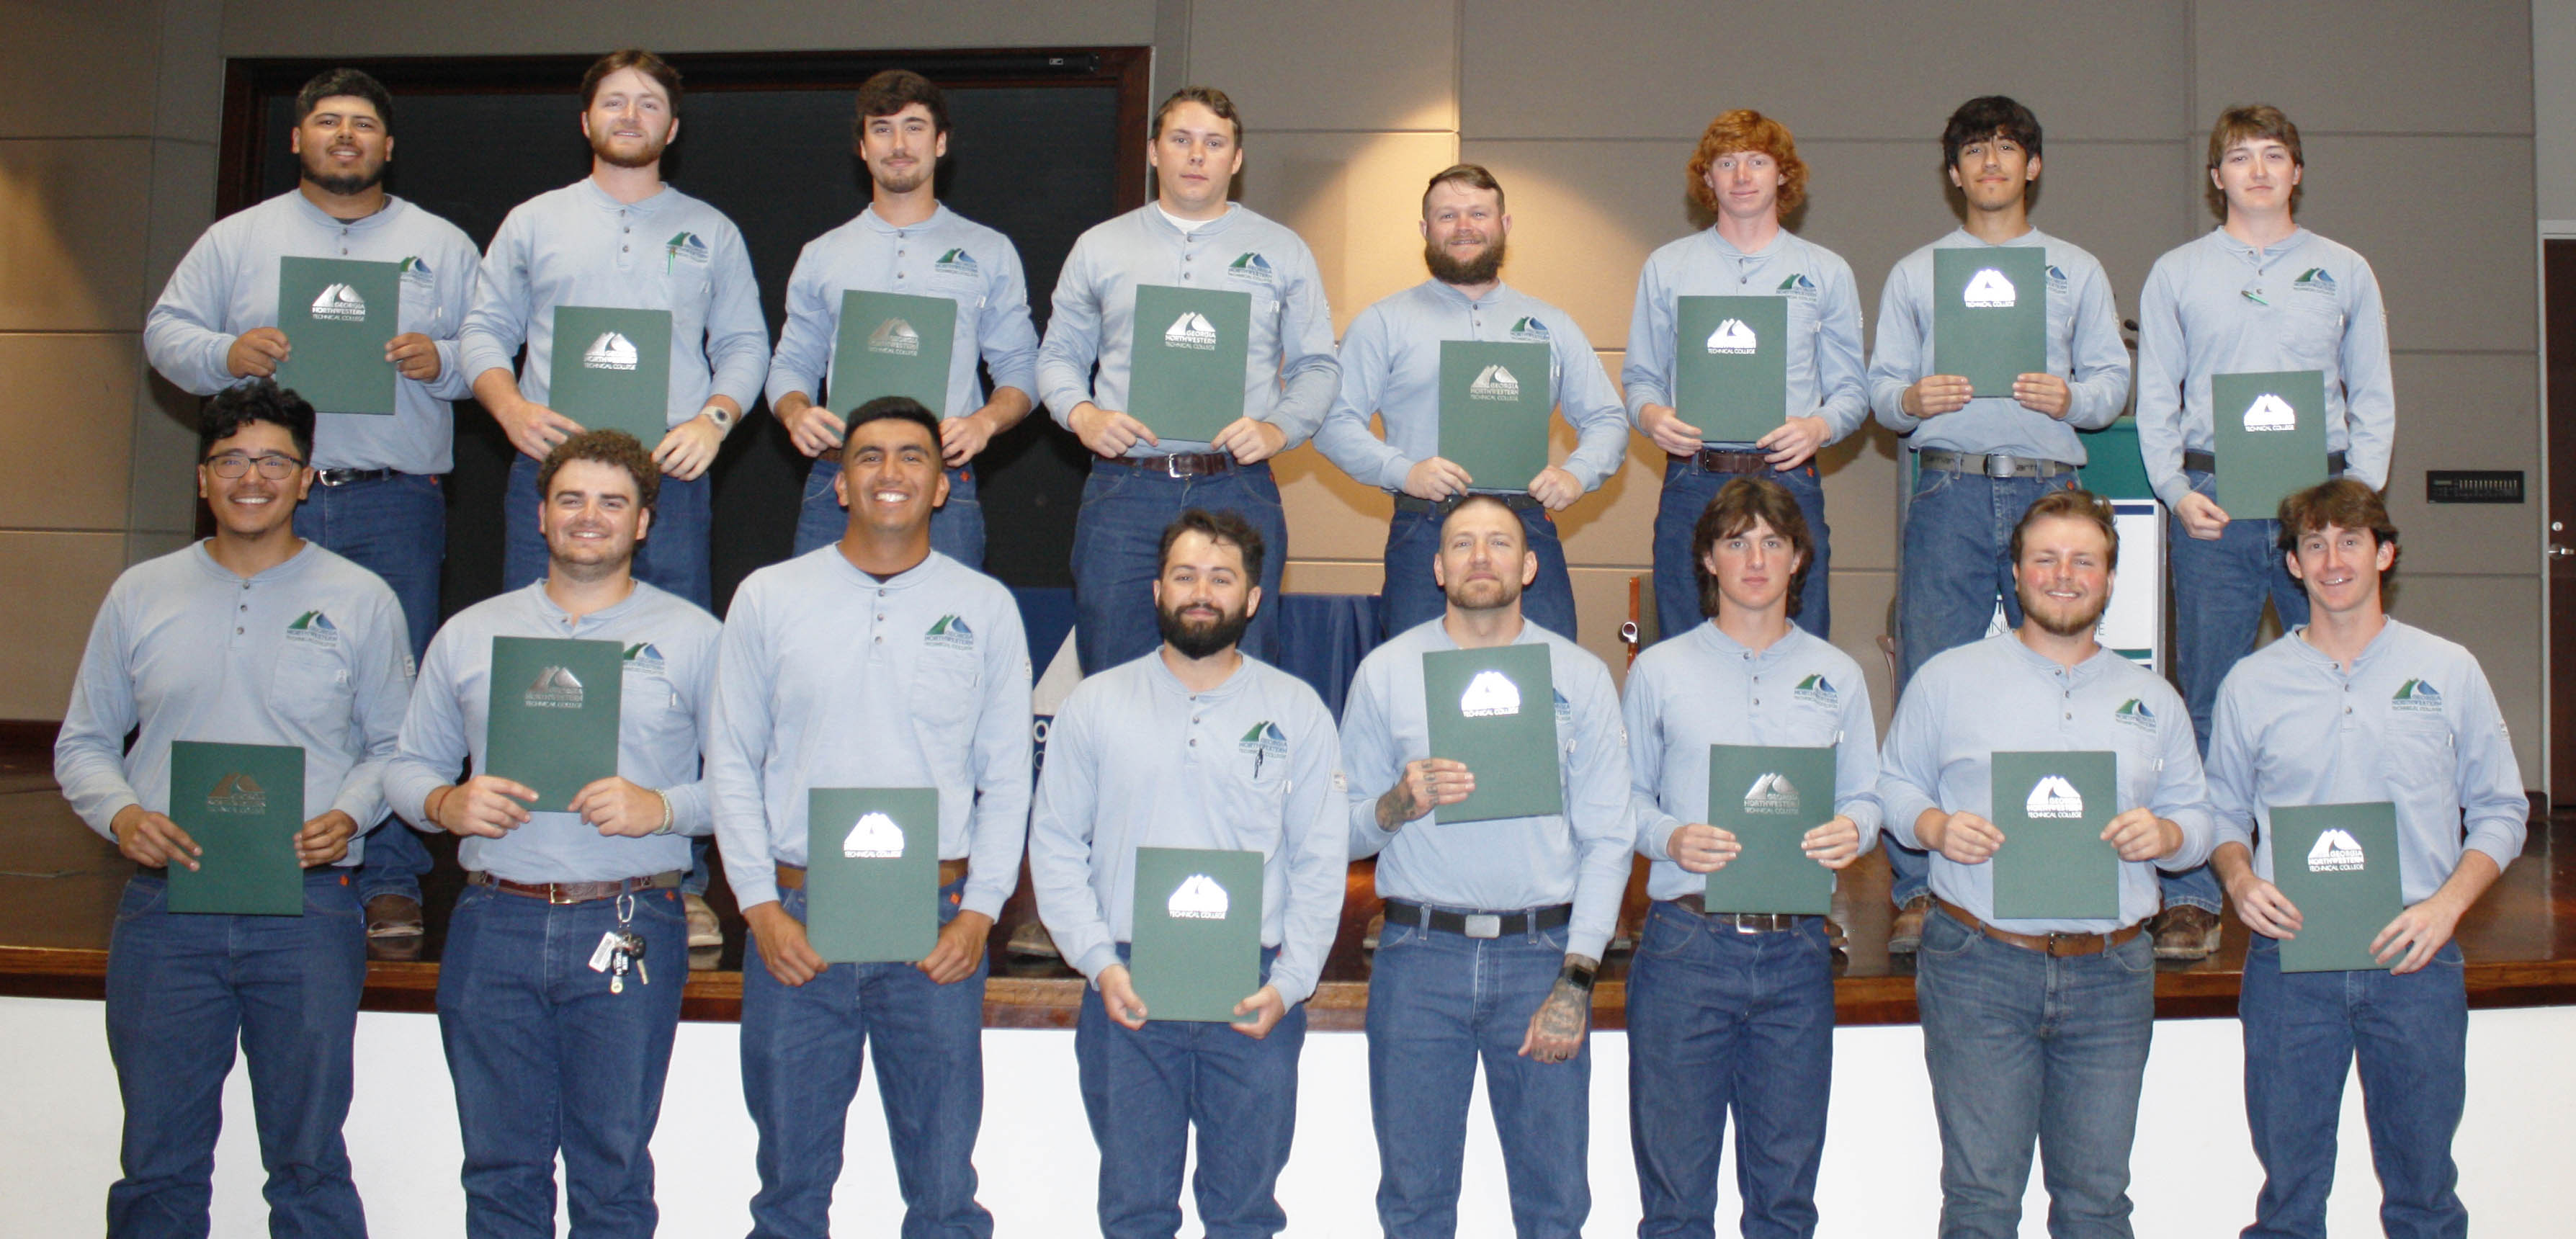 The graduates of the second cohort of GNTC’s Electrical Lineworker Program are (from left, front) Martin Yanez, Jackson Pullen, Bryan Guerrero, Alex Richmond, Perry James Minford, Jacob Mulkey, Brodee Hutcheson, Hunter Henderson; (back) Frederick Daniel Orellana, Tyler Blake Sutton, John Dickens, Everette Drake Childers, Joseph Jones, Chase Murphy, Angel Barboza and Caden Booth.